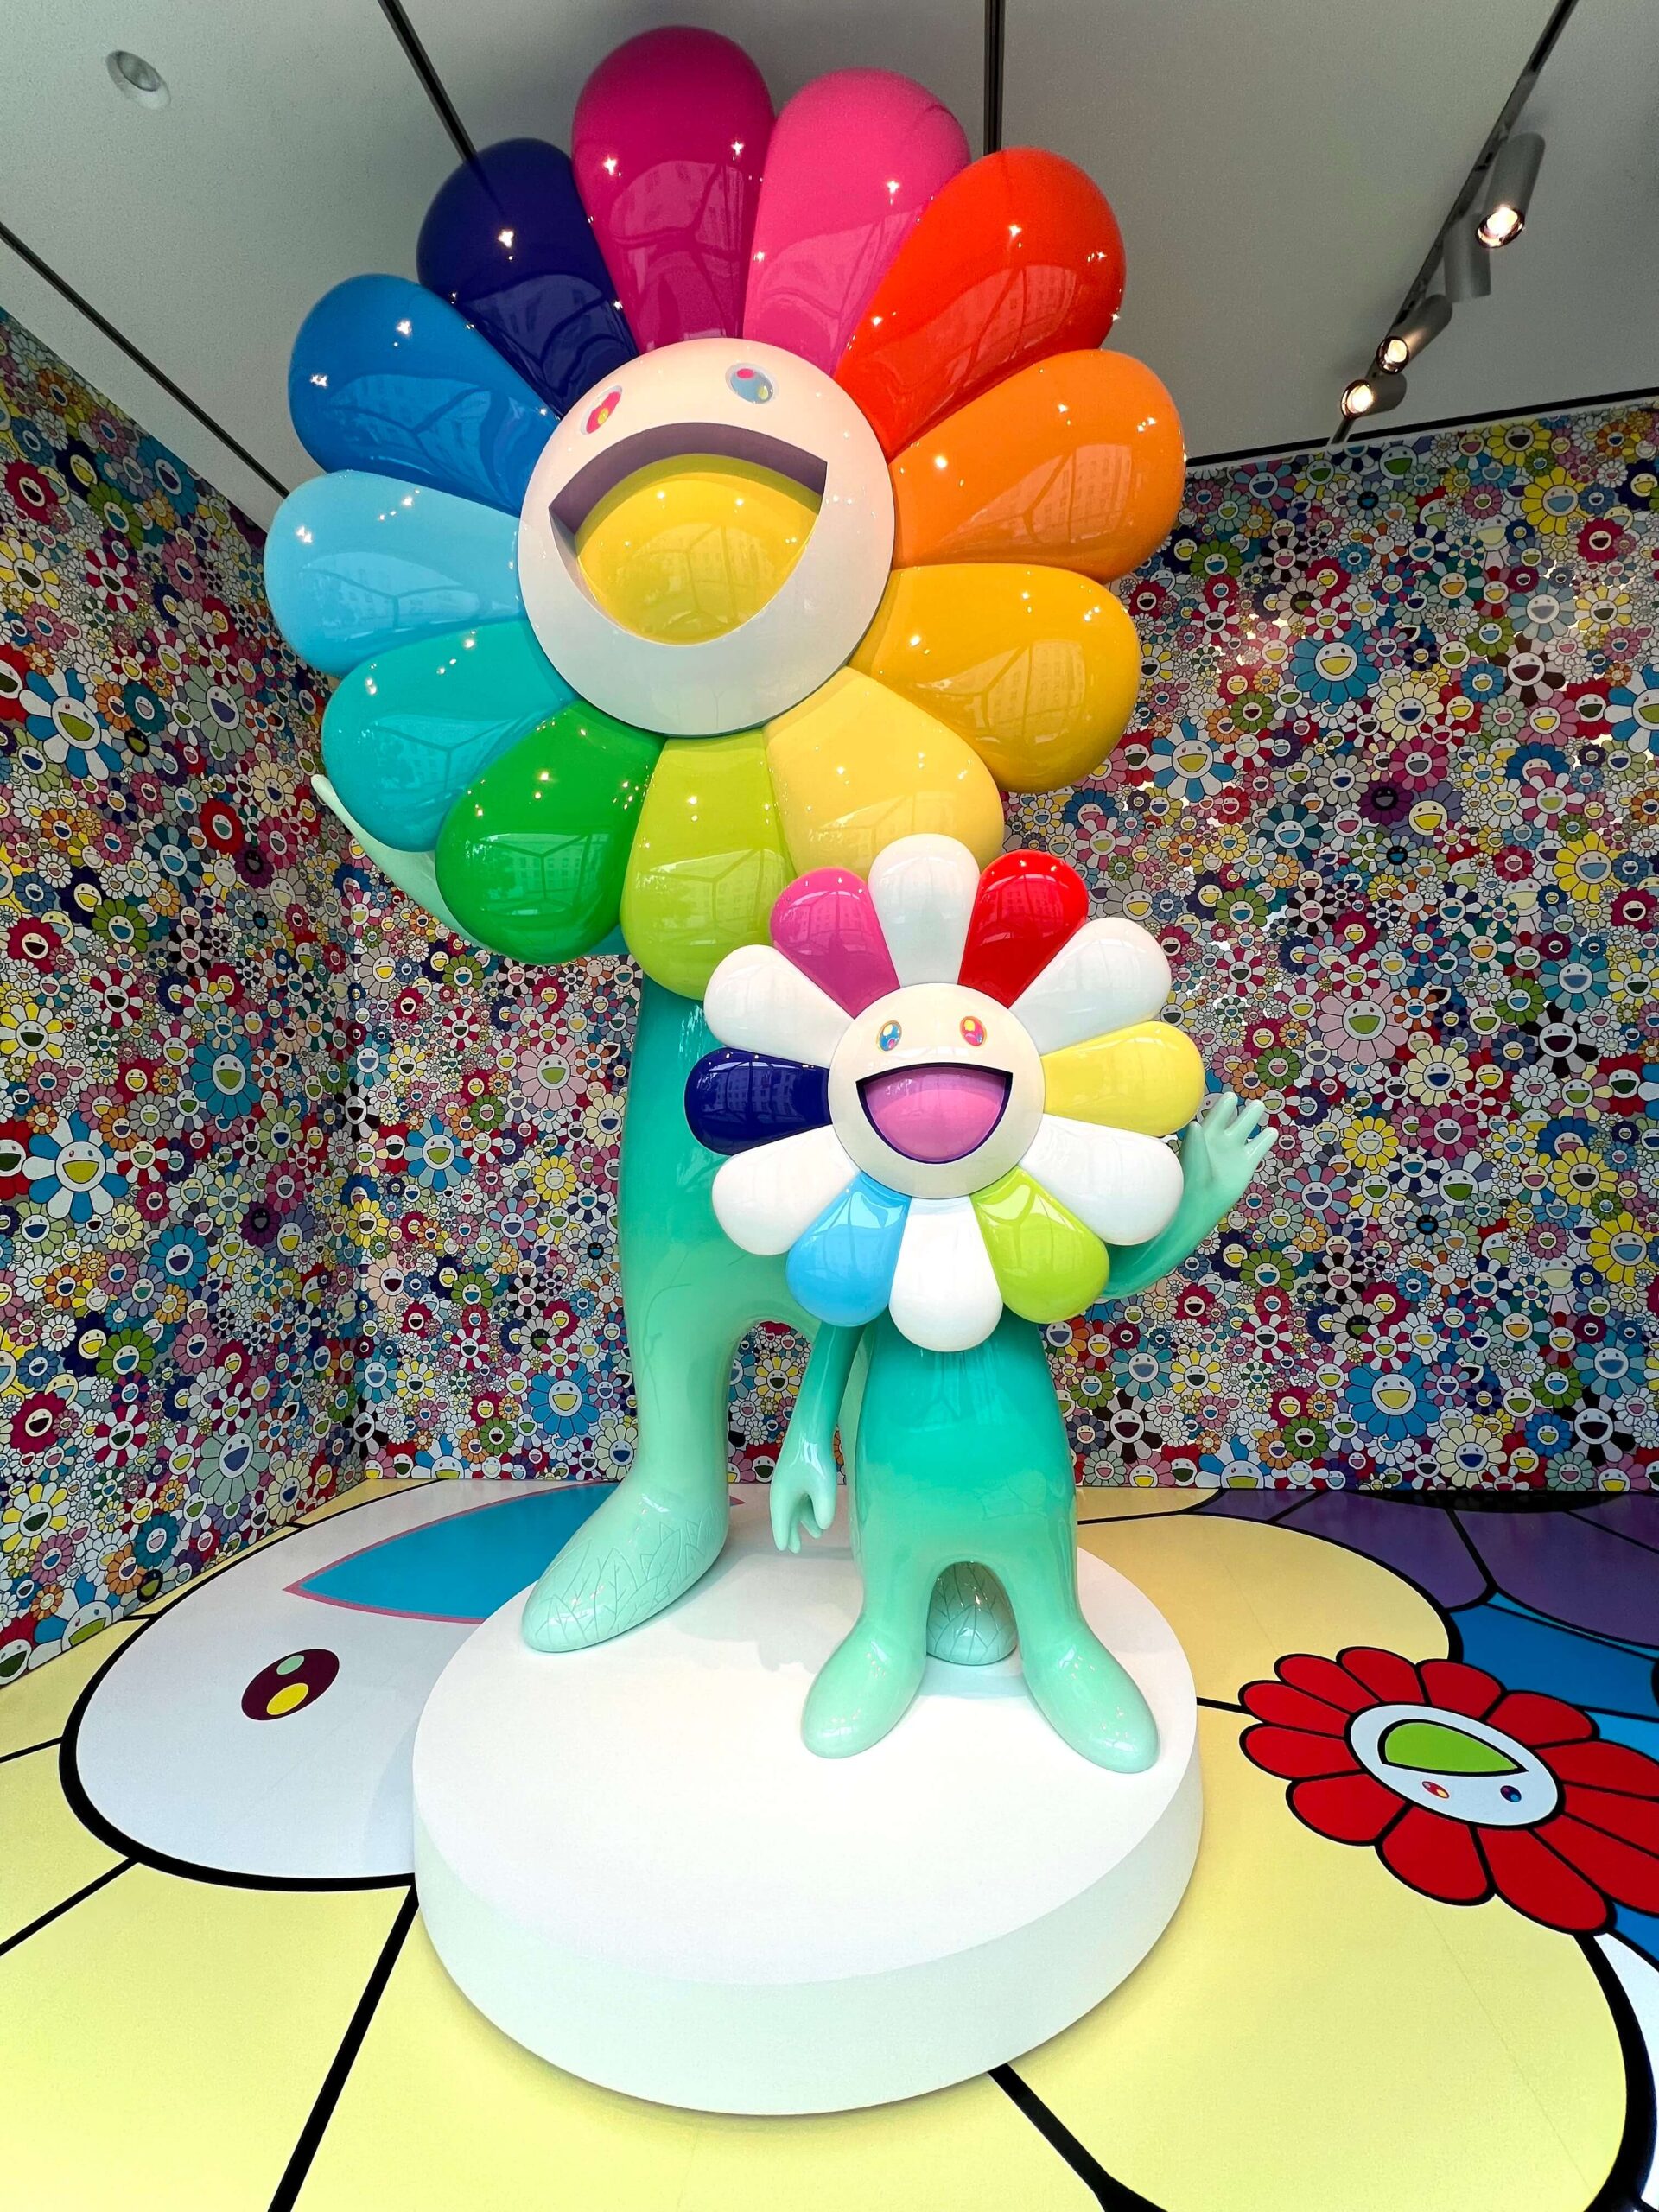 Takashi Murakami: Swelling of Monsterized Human Ego. Together with the Flower Parent and Child, 2023. Asian Art Museum, SF.